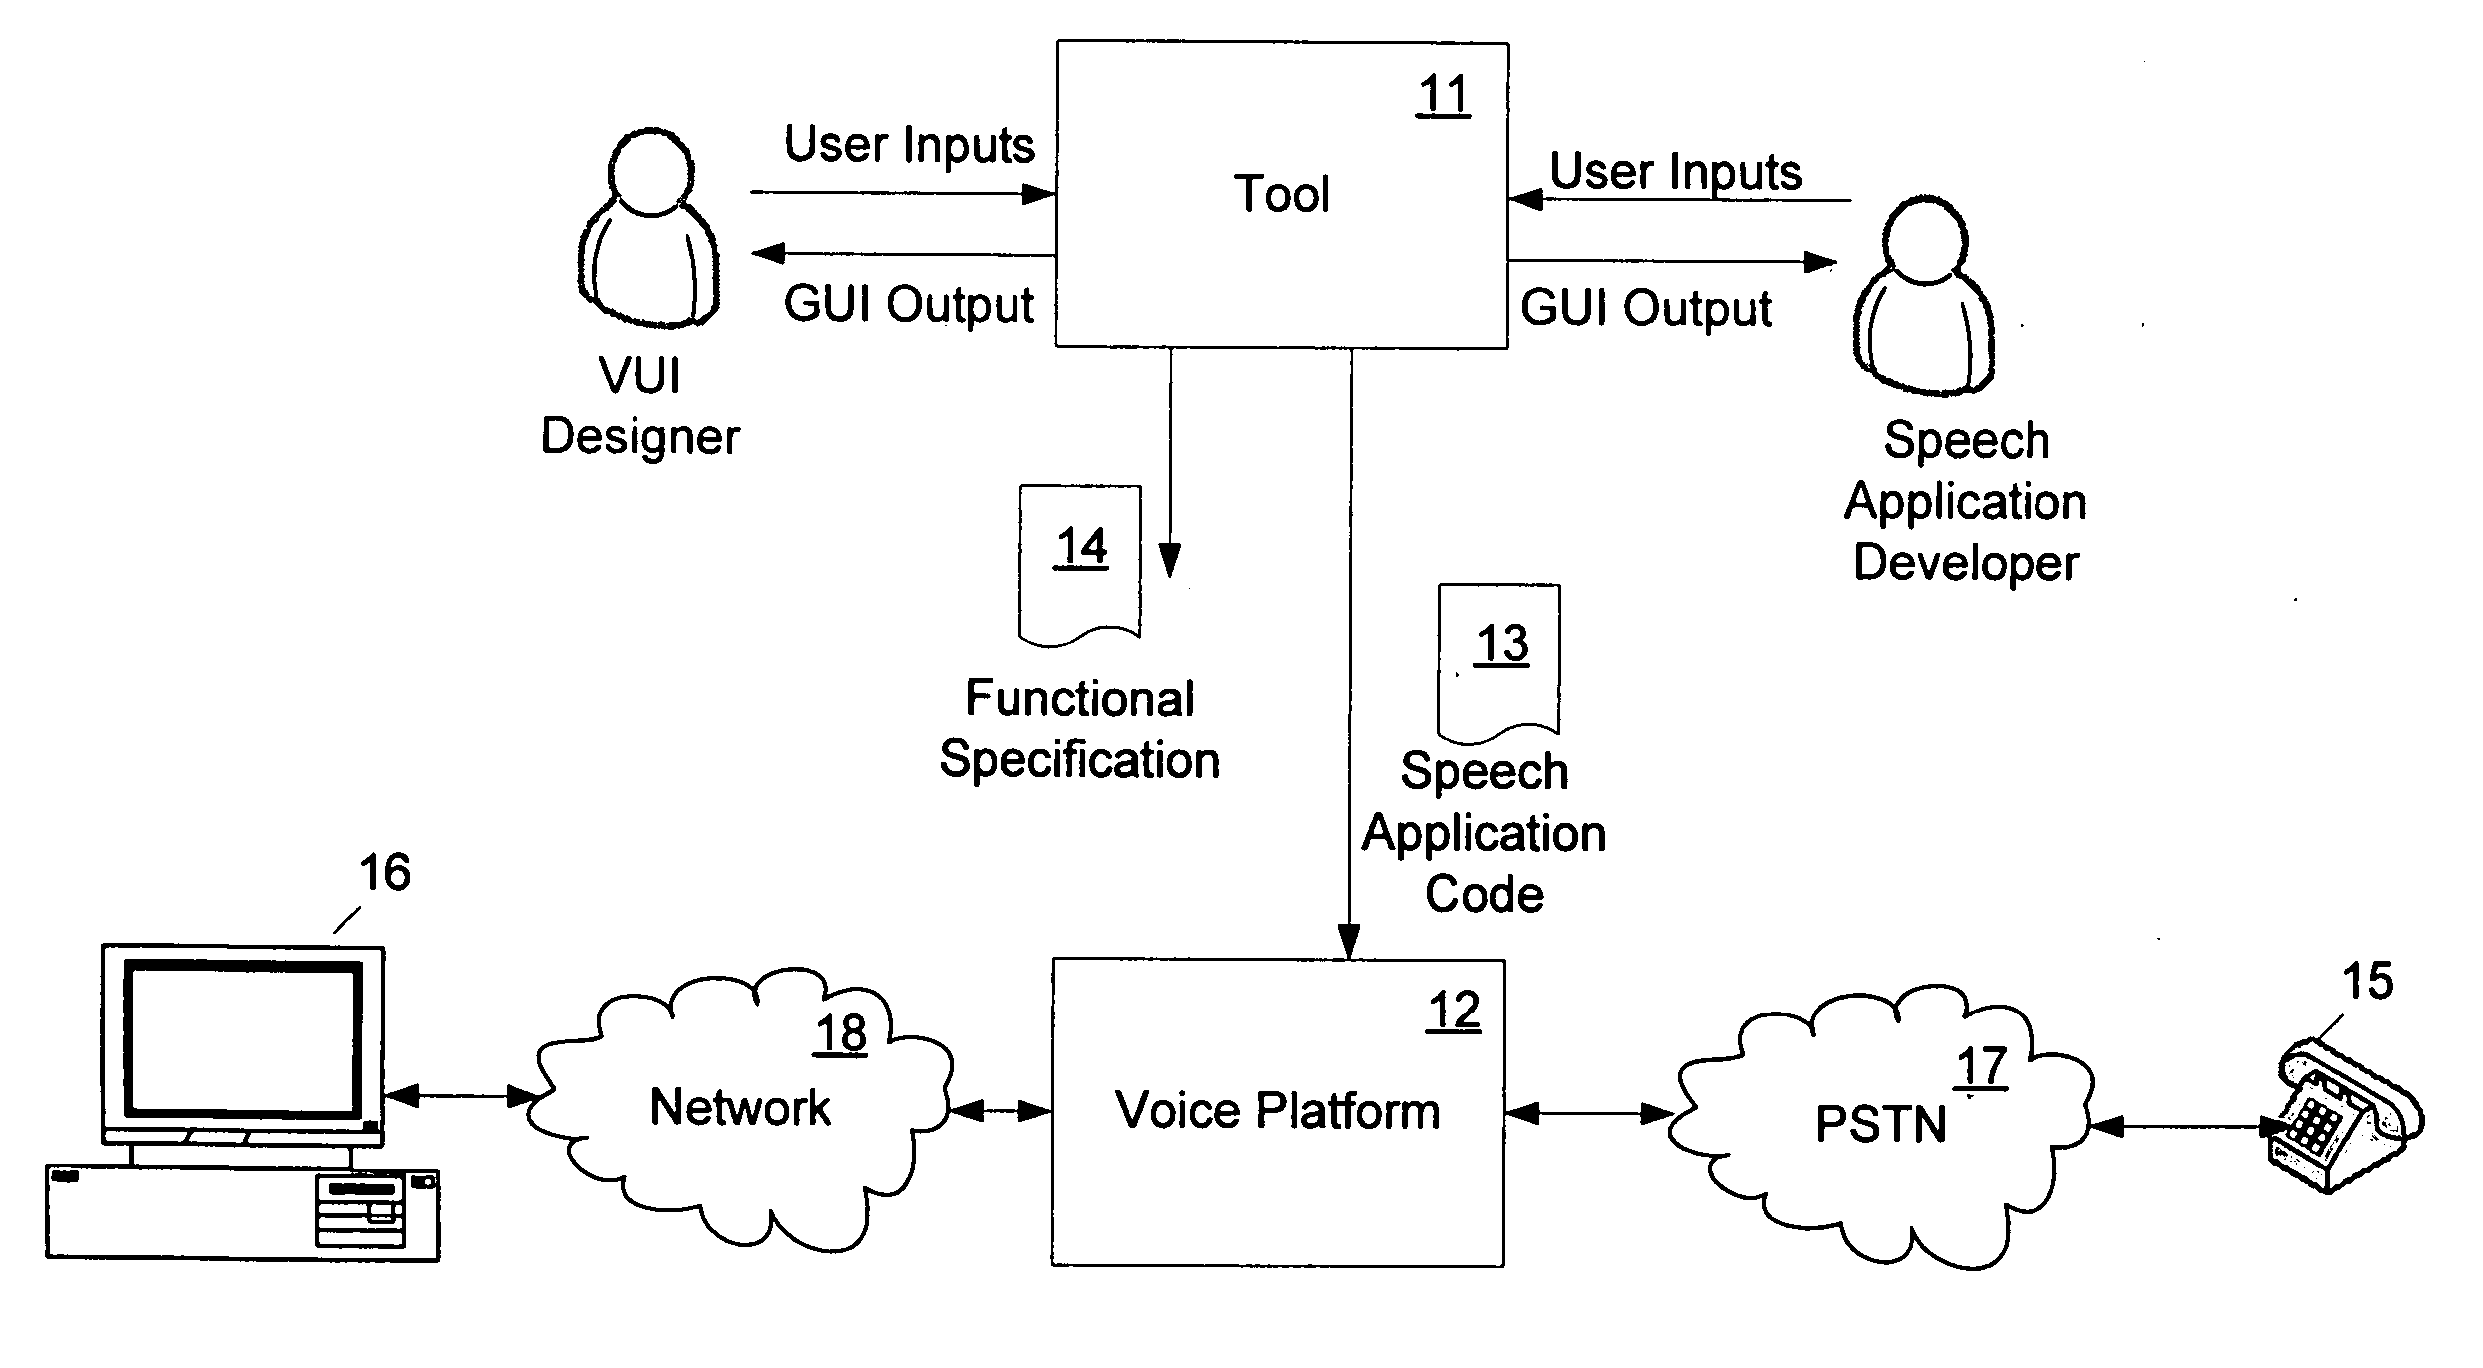 Computer-implemented tool for creation of speech application code and associated functional specification